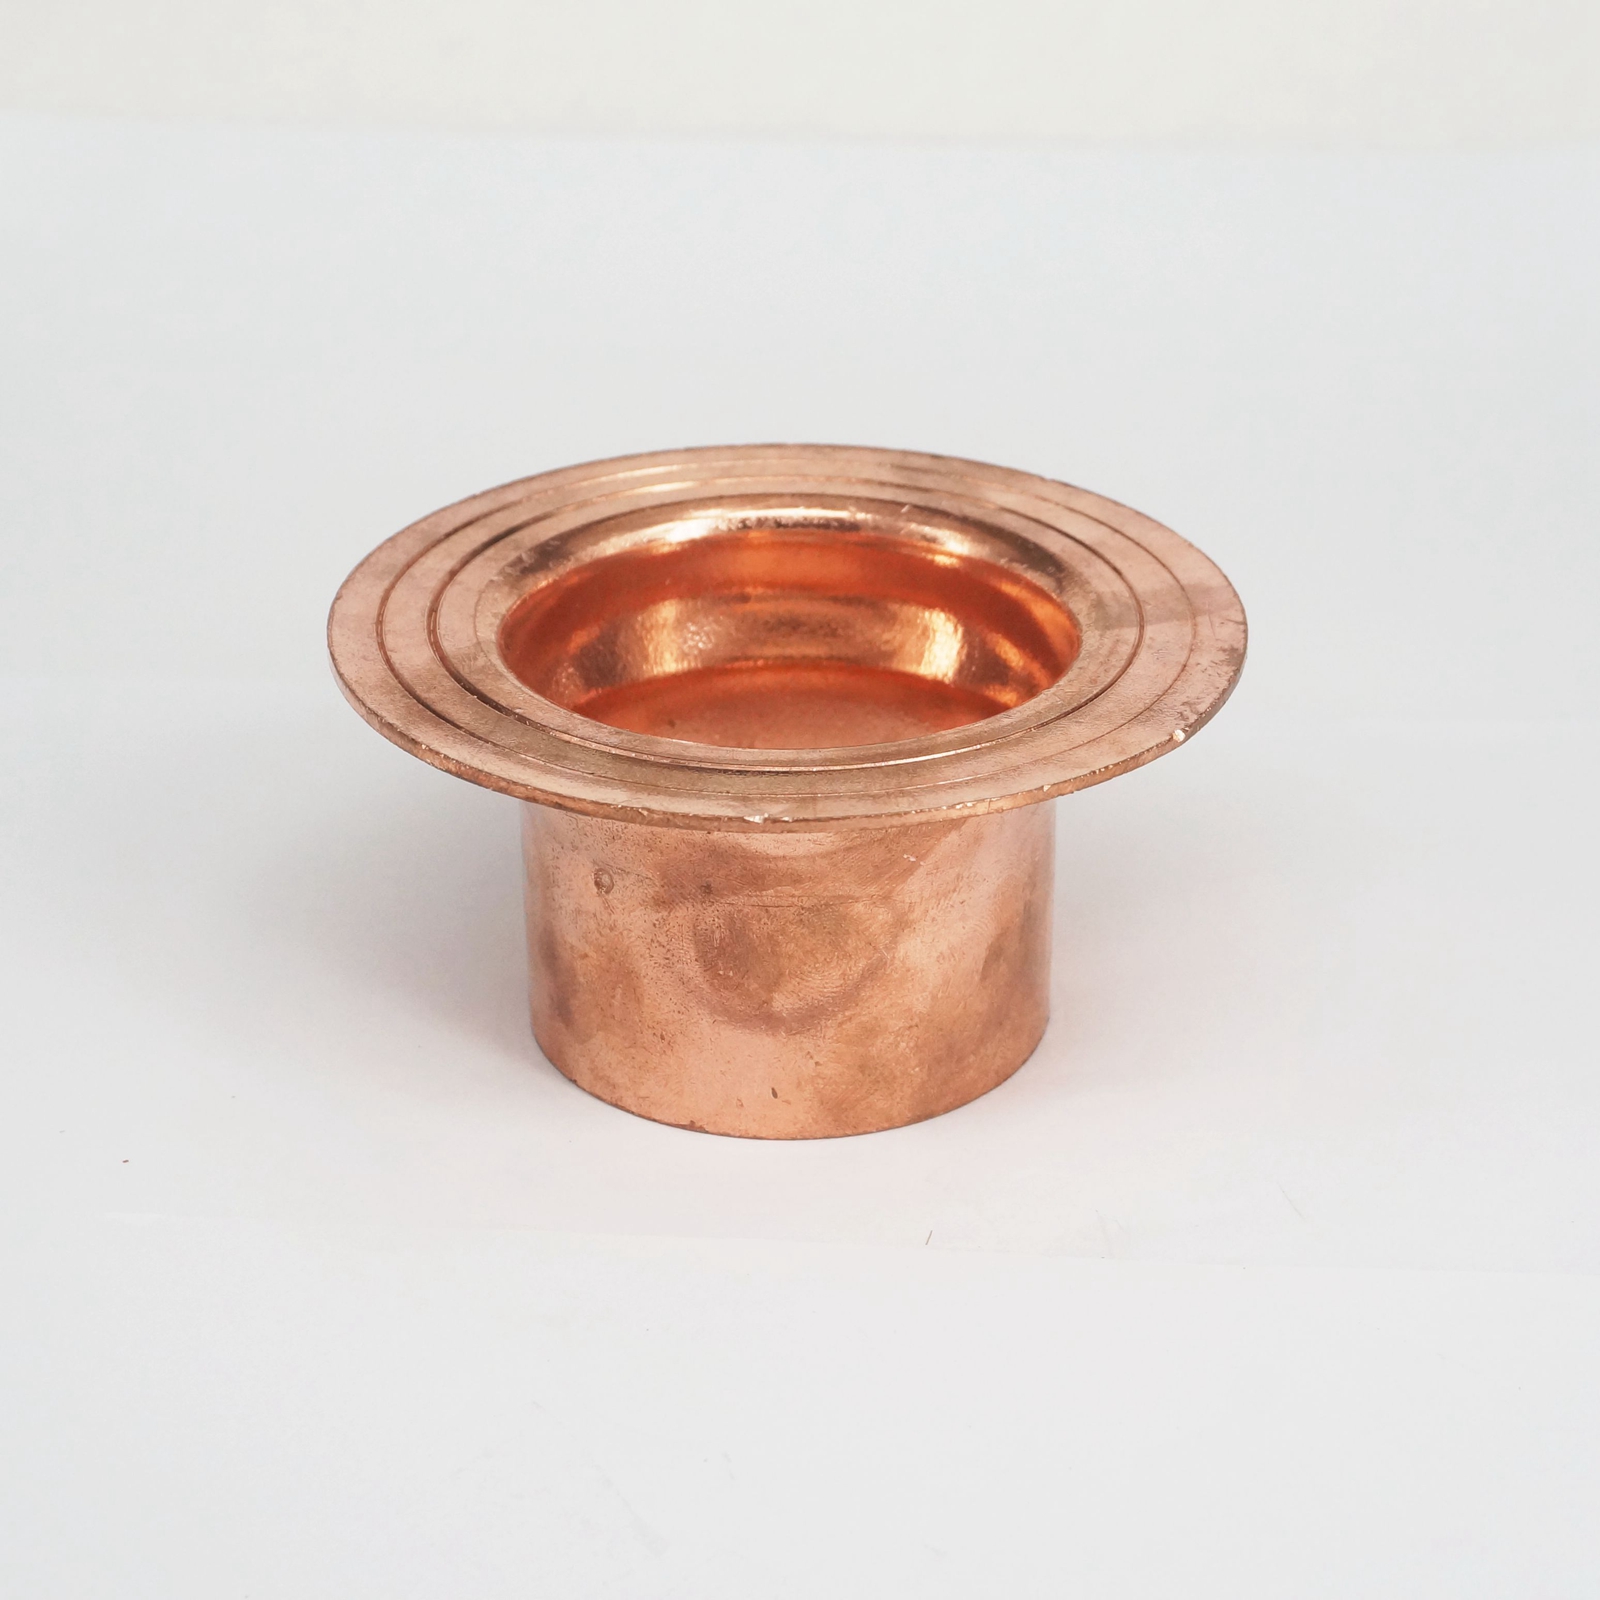 54mm End Feed Copper Insert Liner Pipe Fitting for flange